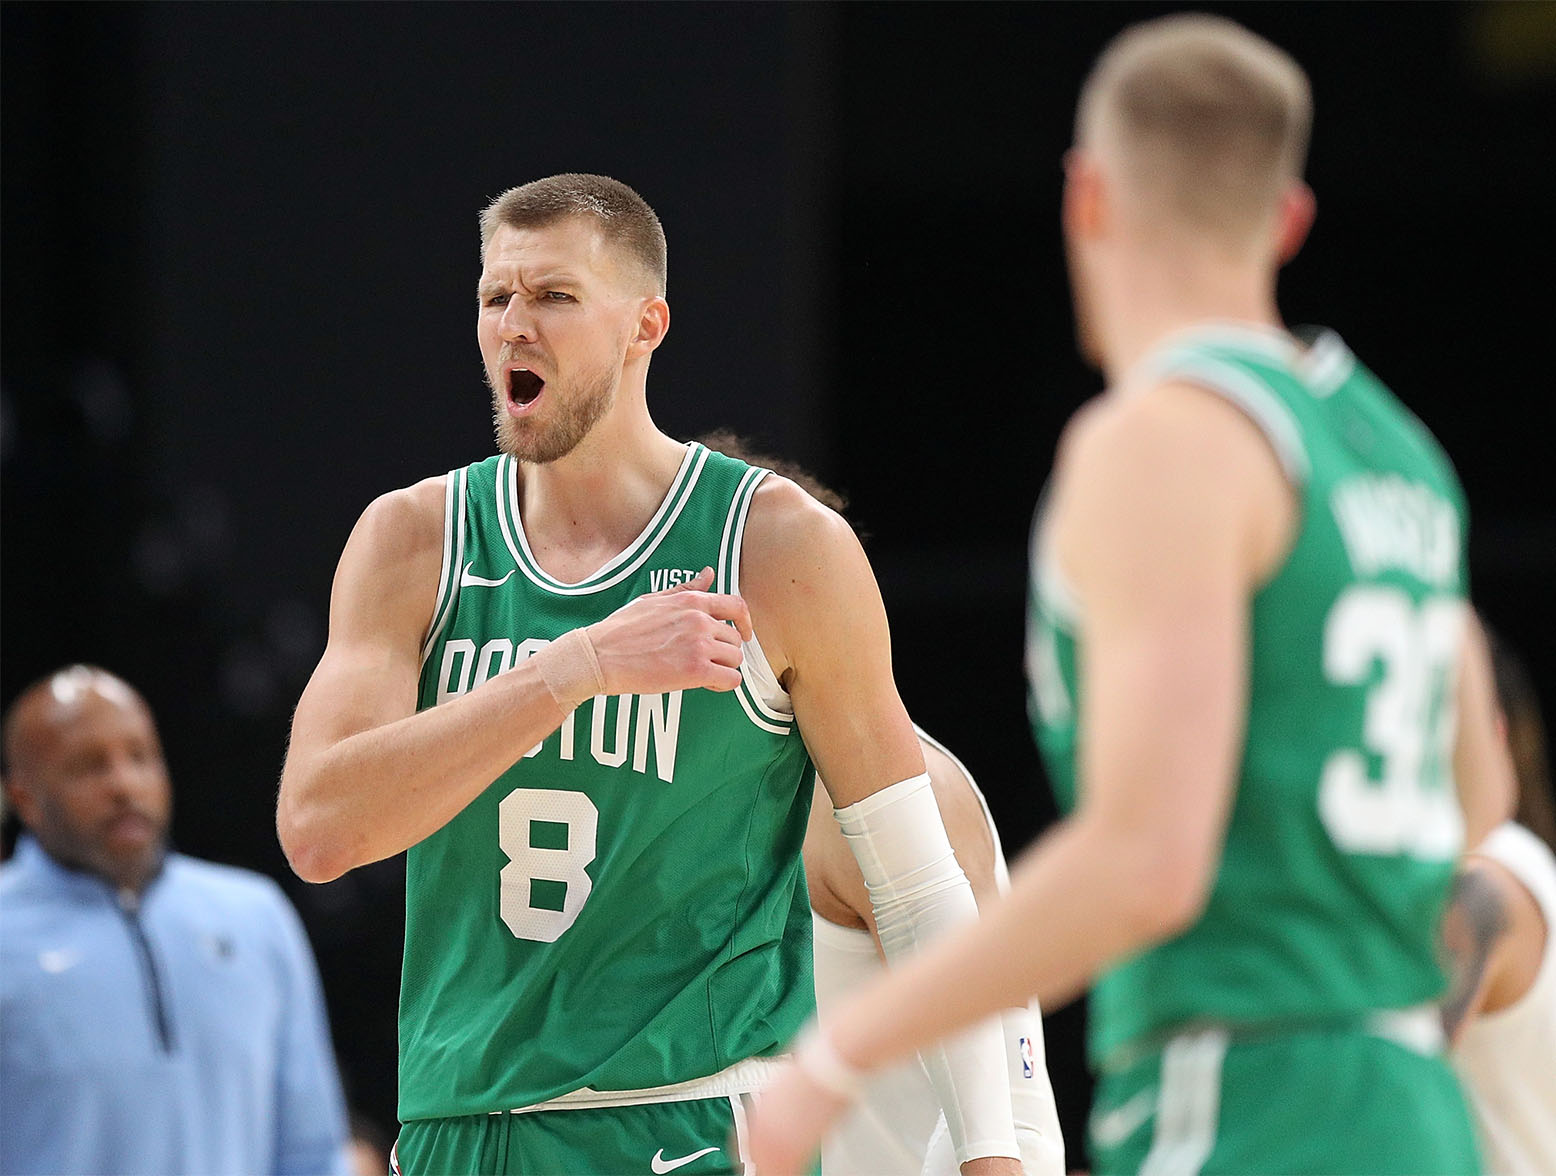 MEMPHIS, TENNESSEE - NOVEMBER 19: Kristaps Porzingis #8 of the Boston Celtics reacts during the second half against the Memphis Grizzlies at FedExForum on November 19, 2023 in Memphis, Tennessee. NOTE TO USER: User expressly acknowledges and agrees that, by downloading and or using this photograph, User is consenting to the terms and conditions of the Getty Images License Agreement. (Photo by Justin Ford/Getty Images)